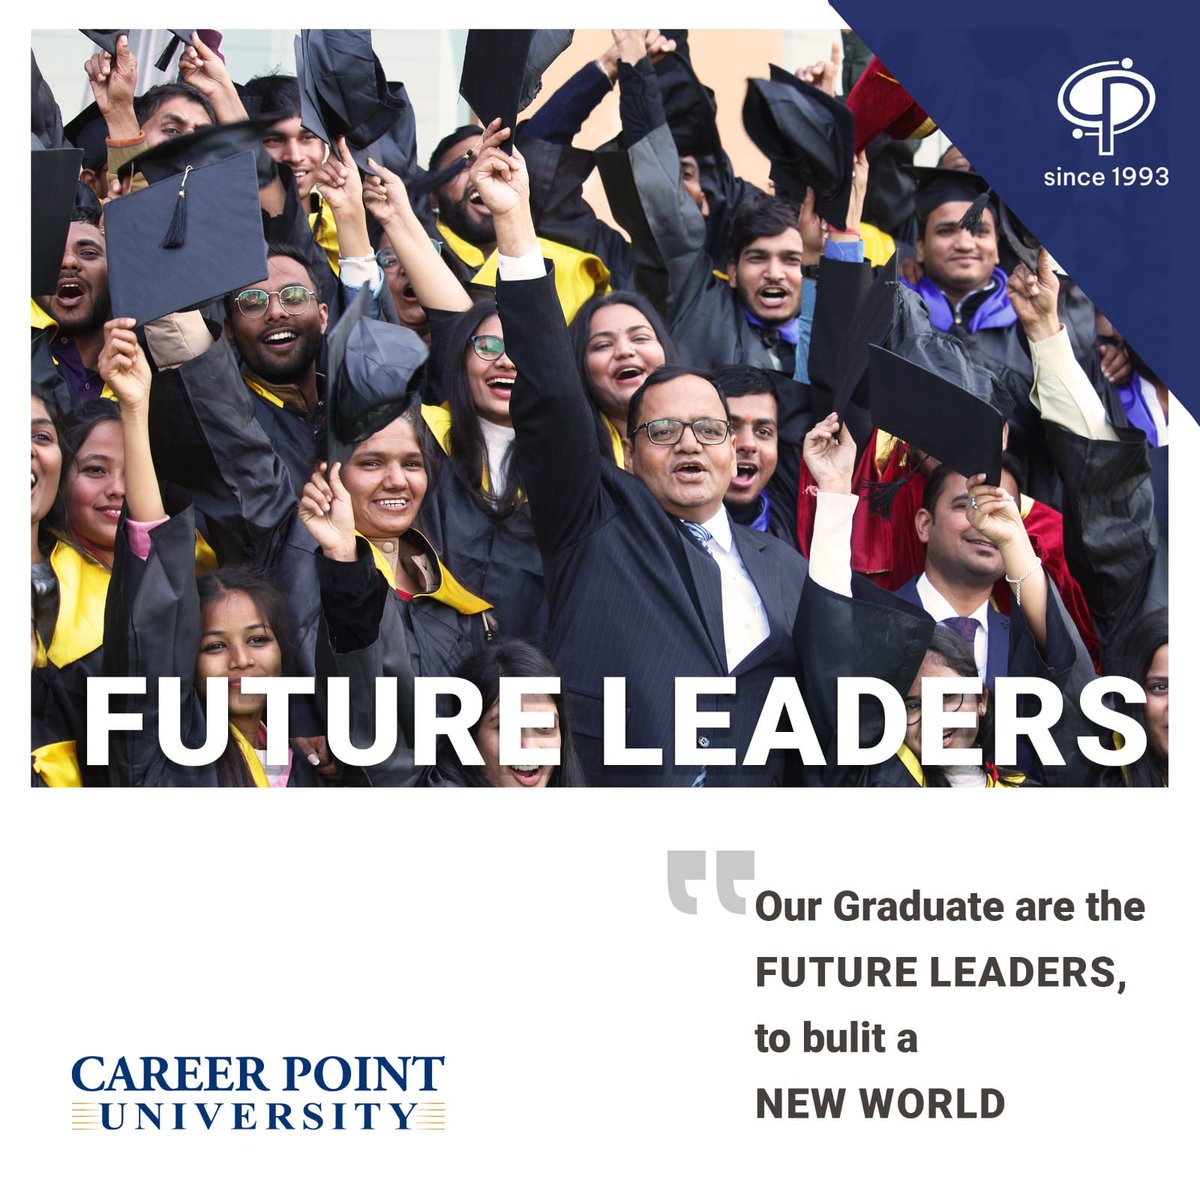 'FUTURE LEADERS'
Our Graduates are the FUTURE LEADERS to build the new world.

#cpu #cpukota #CareerPointUniversity #college #universitylife #campuslife #thousandsmiles #studentlife #lifeatcpu #rajasthan #beautifulcampus #AdmissionsOpen #kota #universitylife #Cuet